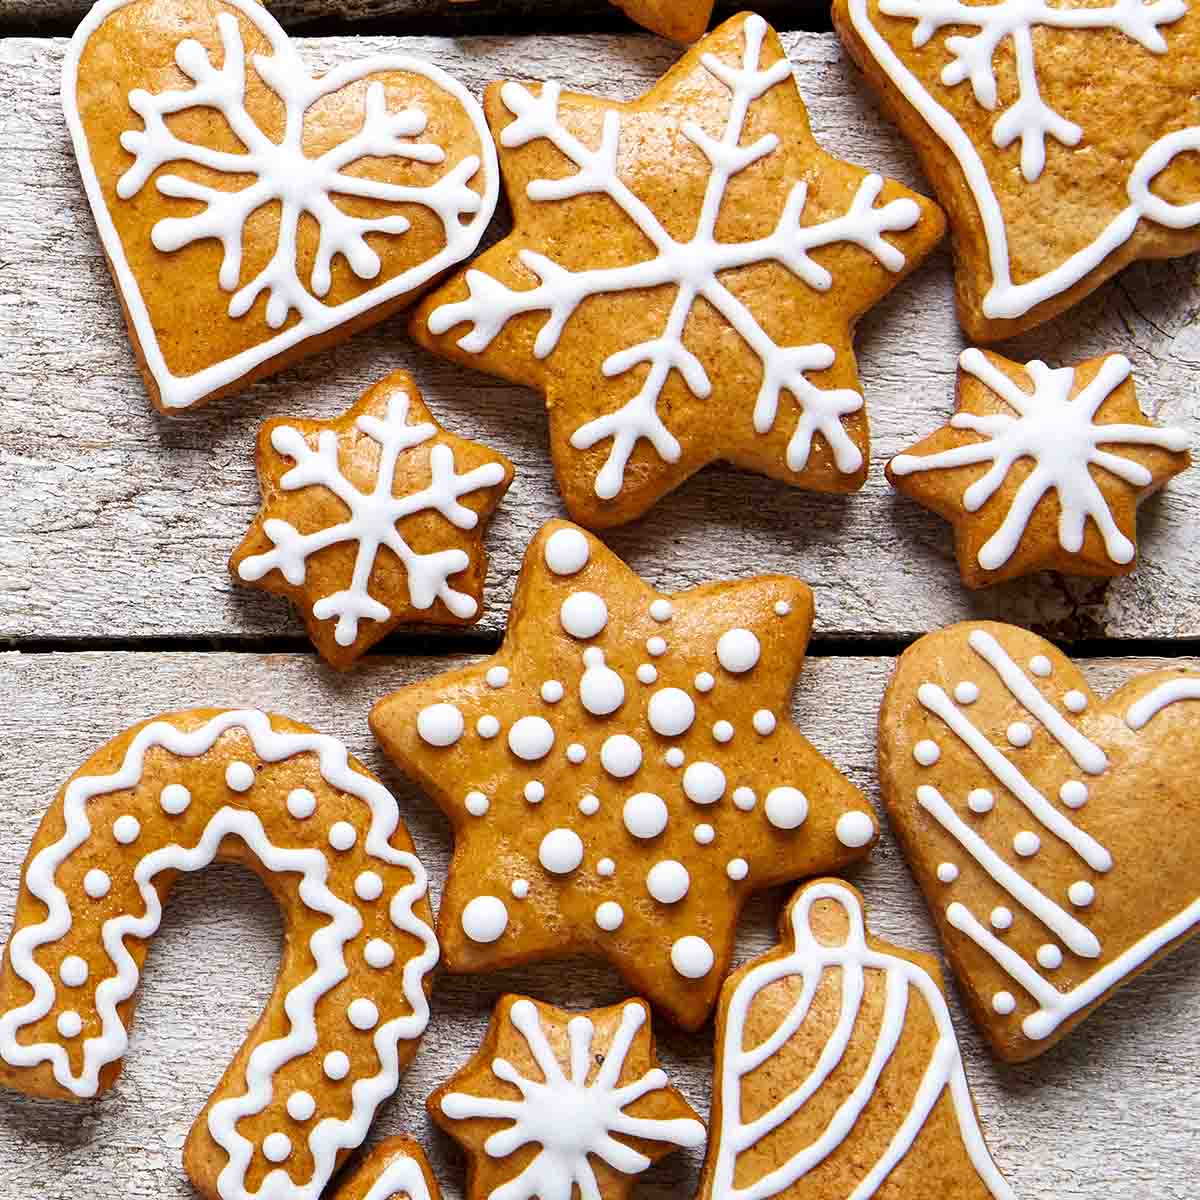 A variety of iced gingersnaps cookies cut into different shapes.